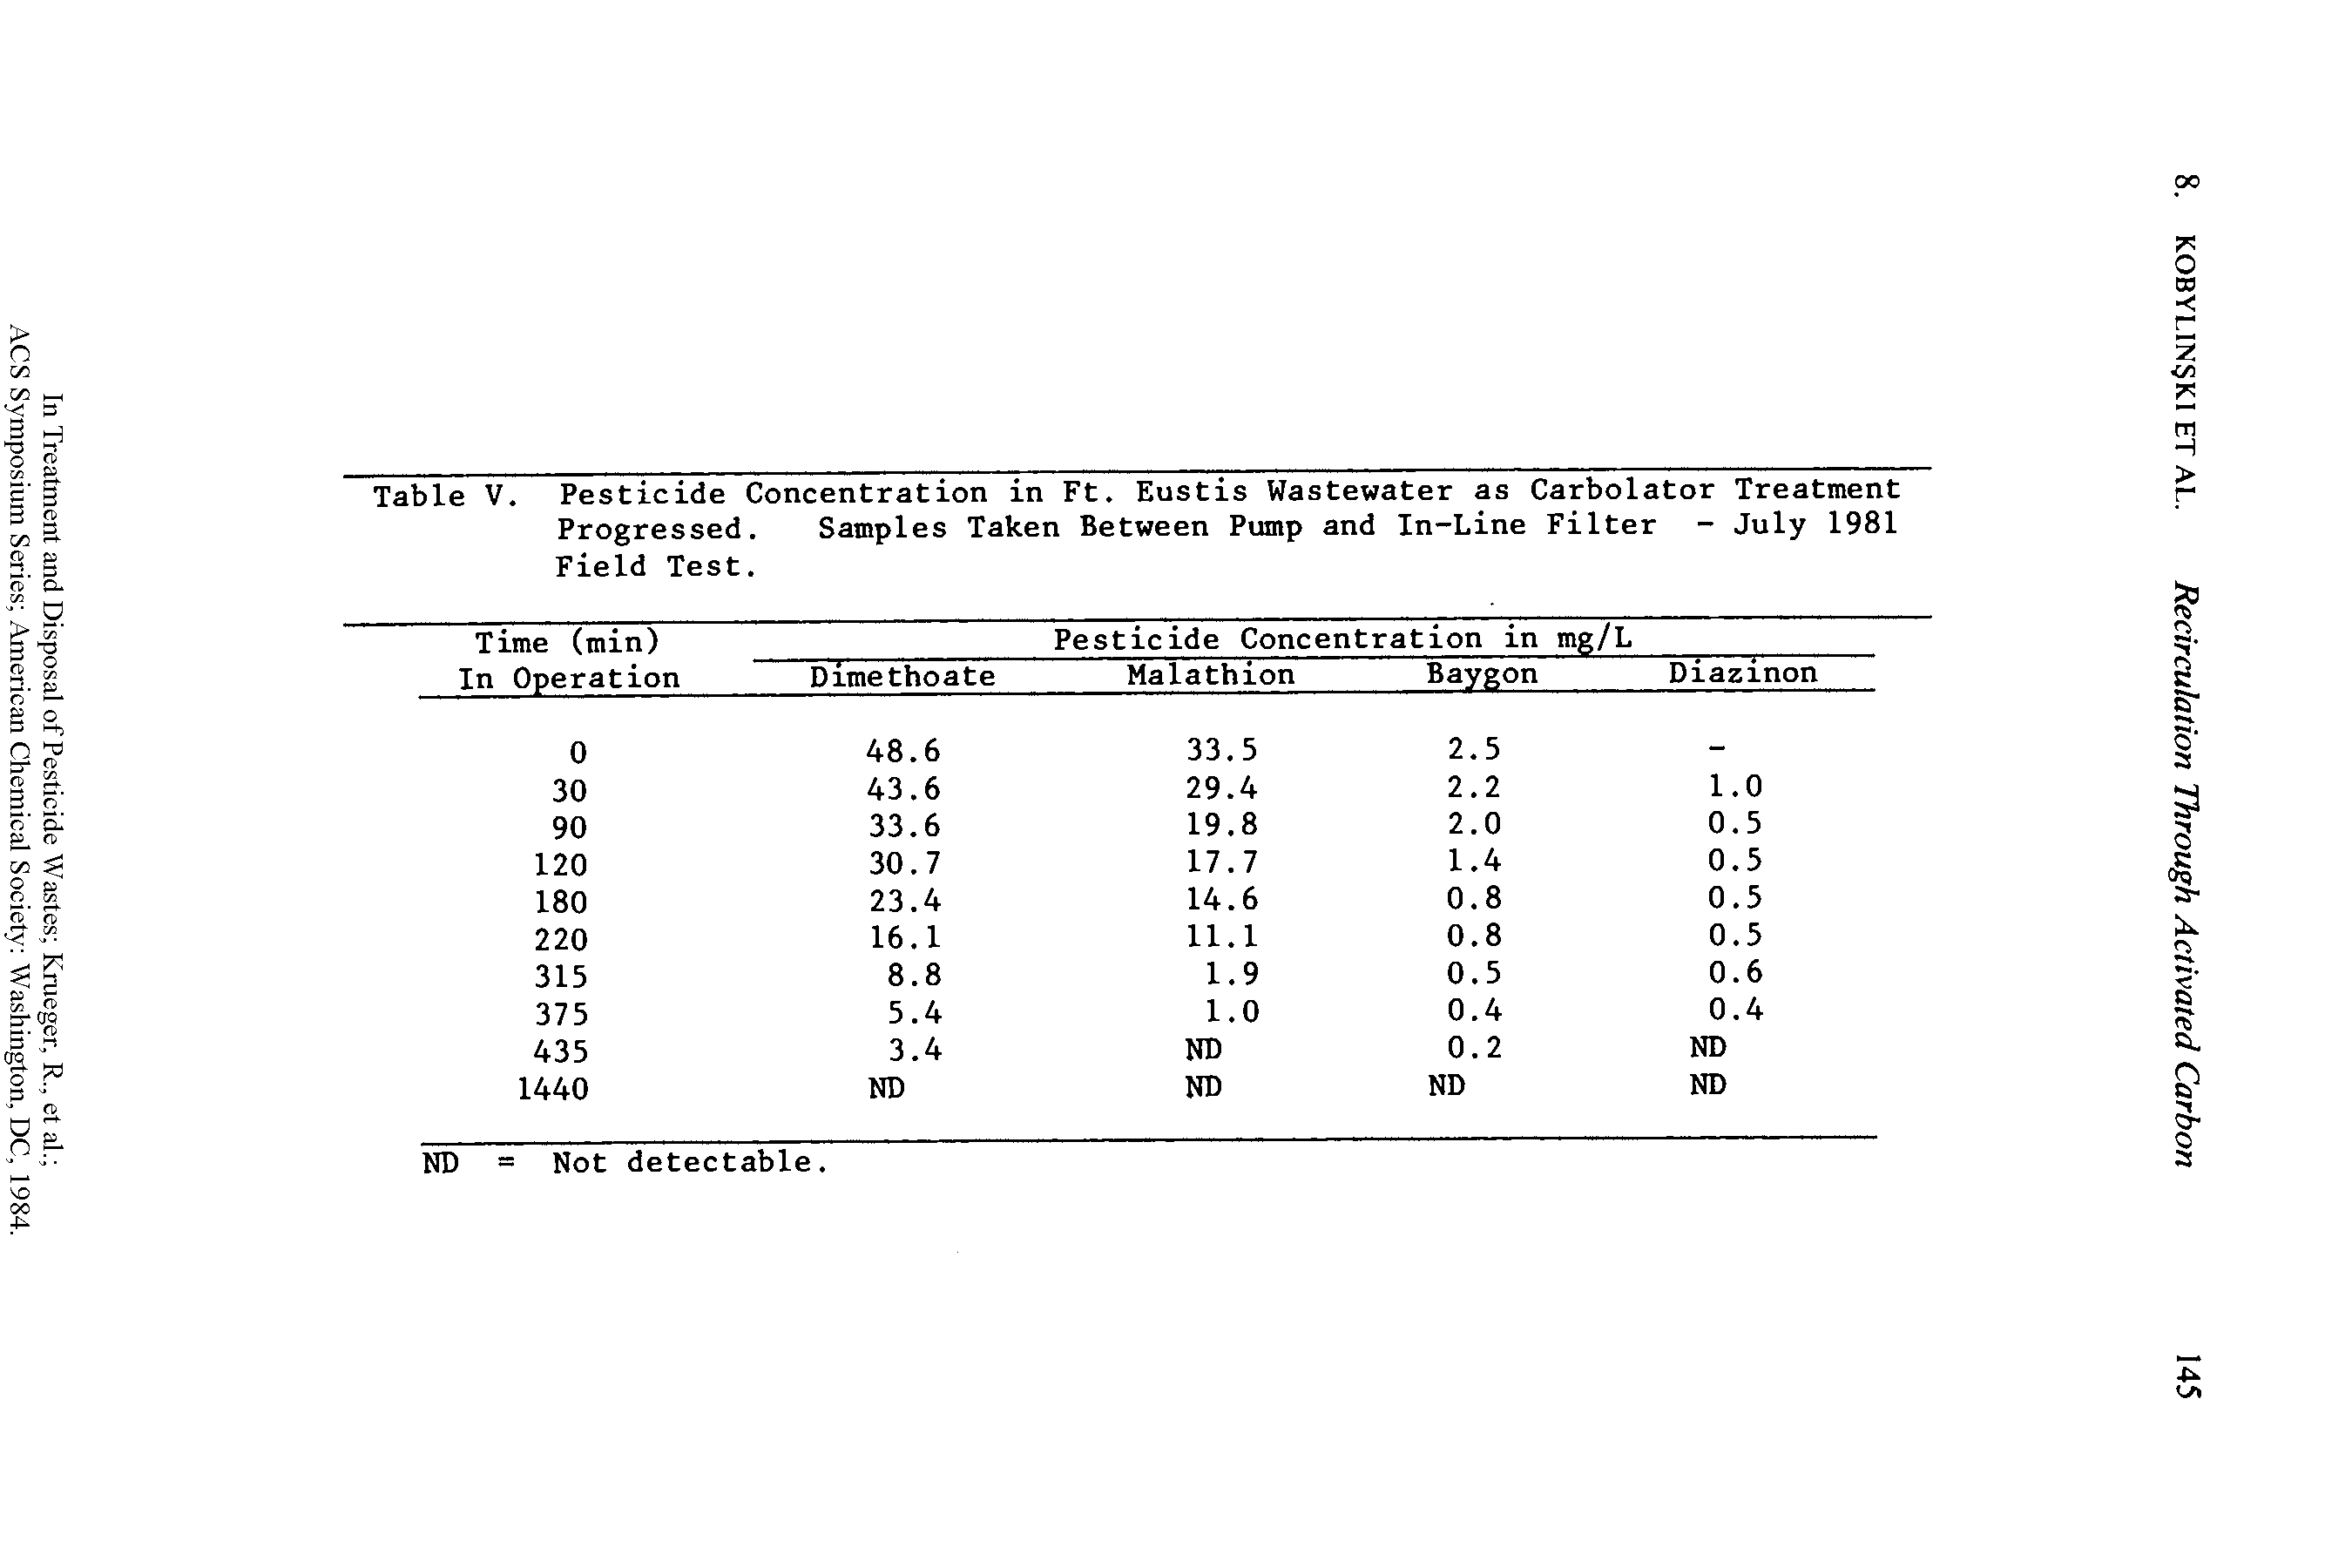 Table V. Pesticide Concentration in Ft. Eustis Wastewater as Carbolator Treatment Progressed. Samples Taken Between Pump and In-Line Filter - July 1981 Field Test.